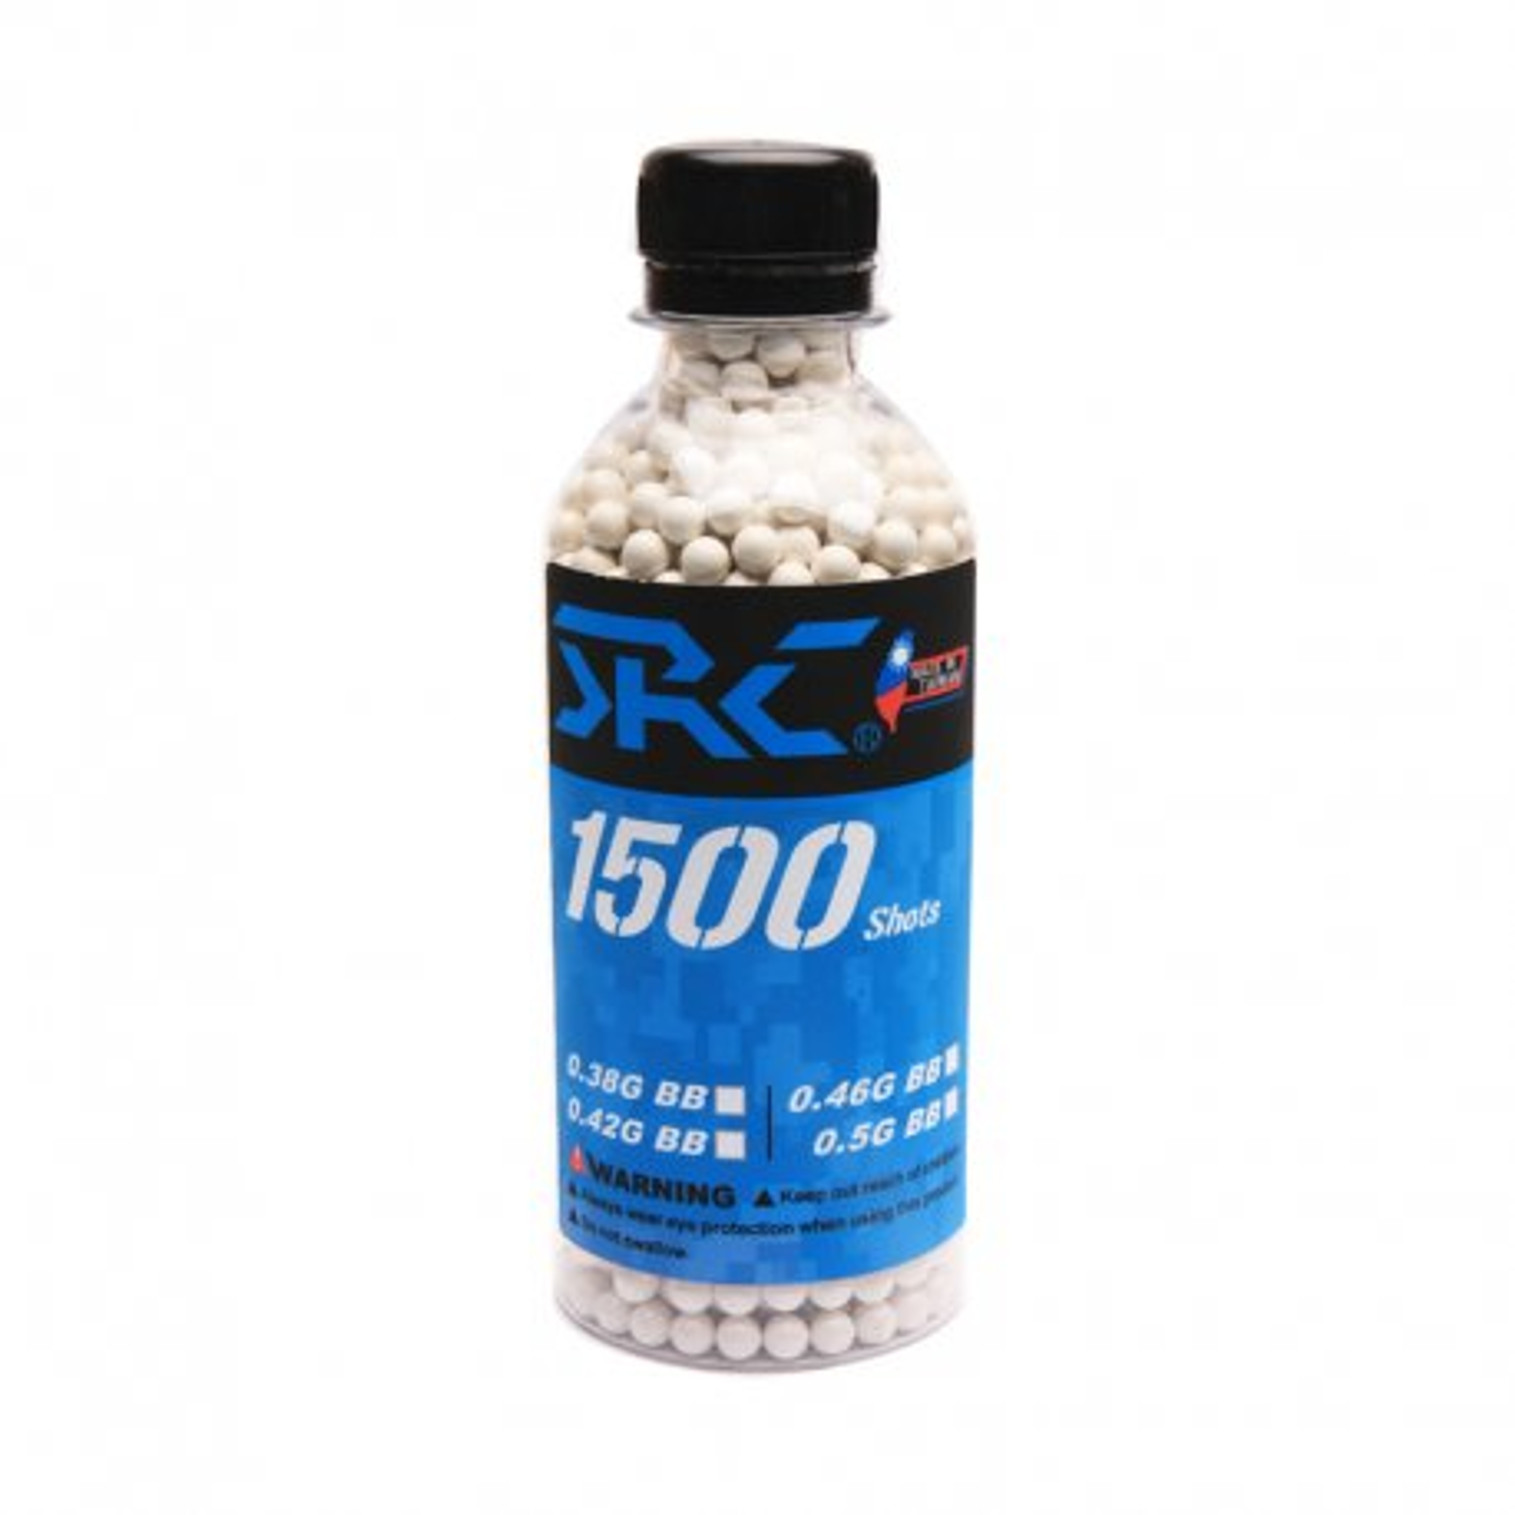 SRC Perfect Airsoft BB 0.50g 1500 Count Bottle